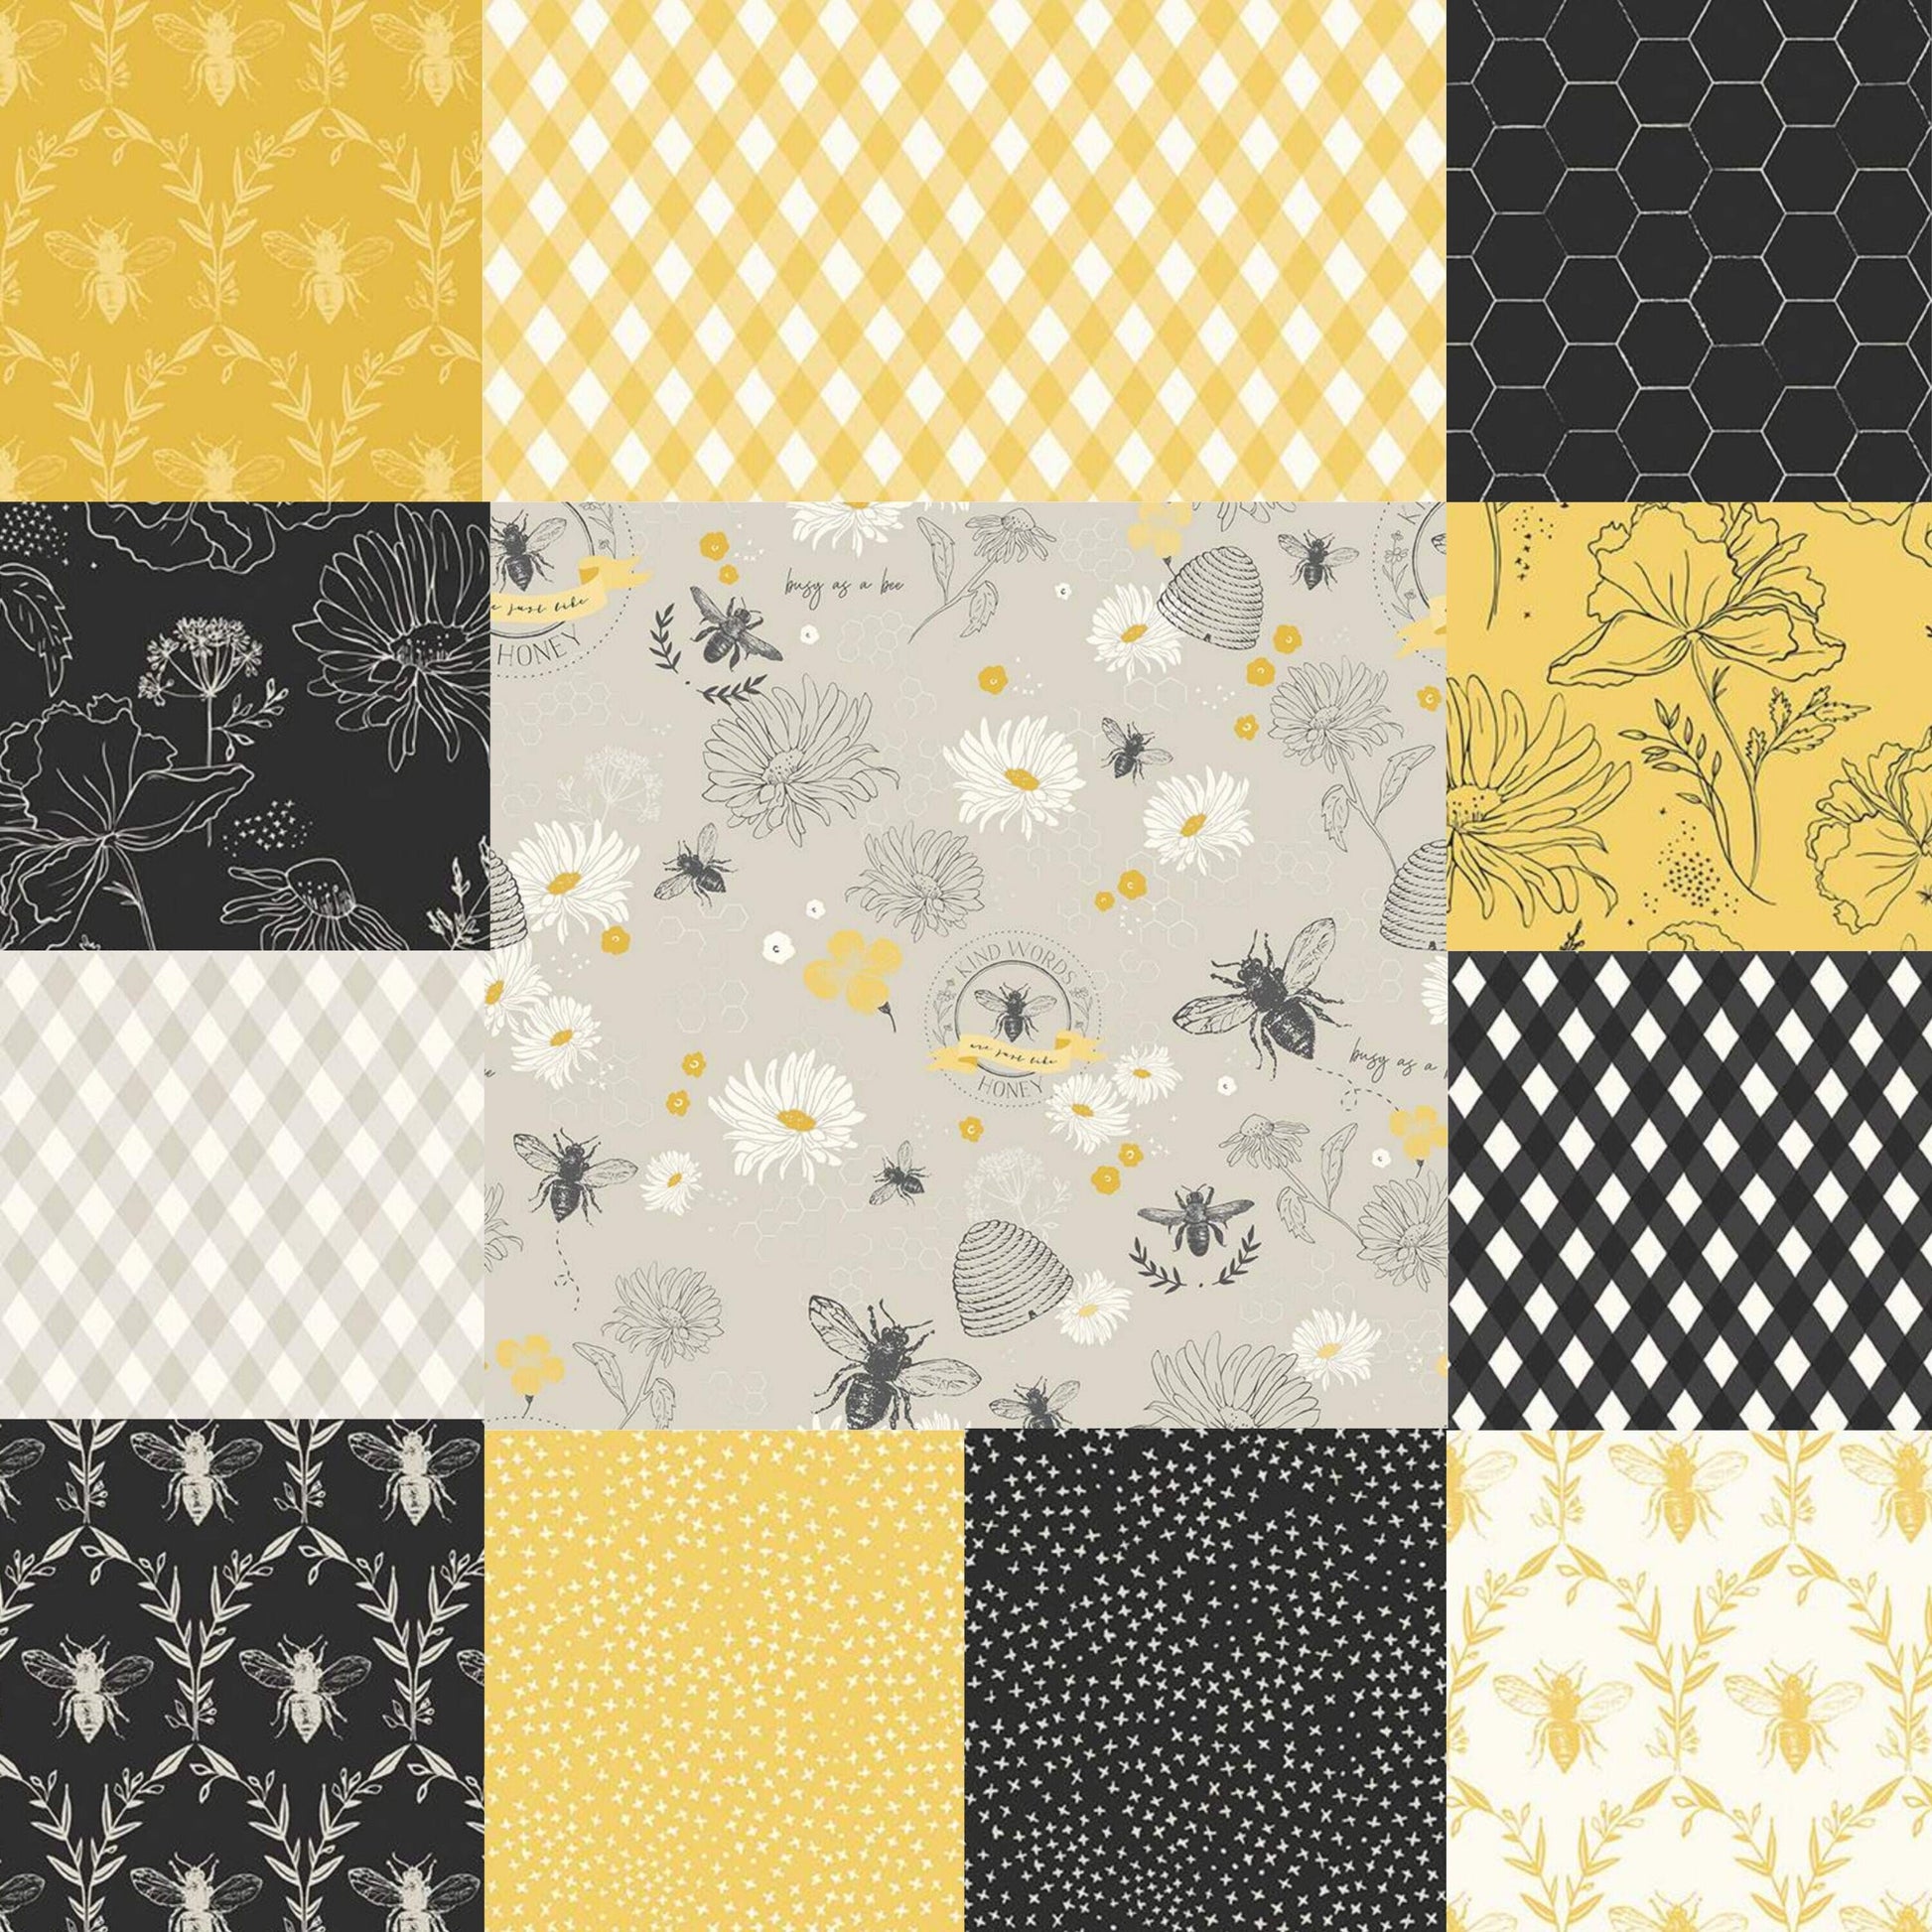 LAMINATED cotton fabric - Honey Bee Wildflowers Black (sold continuous by the half yard) Food Safe Fabric, BPA free